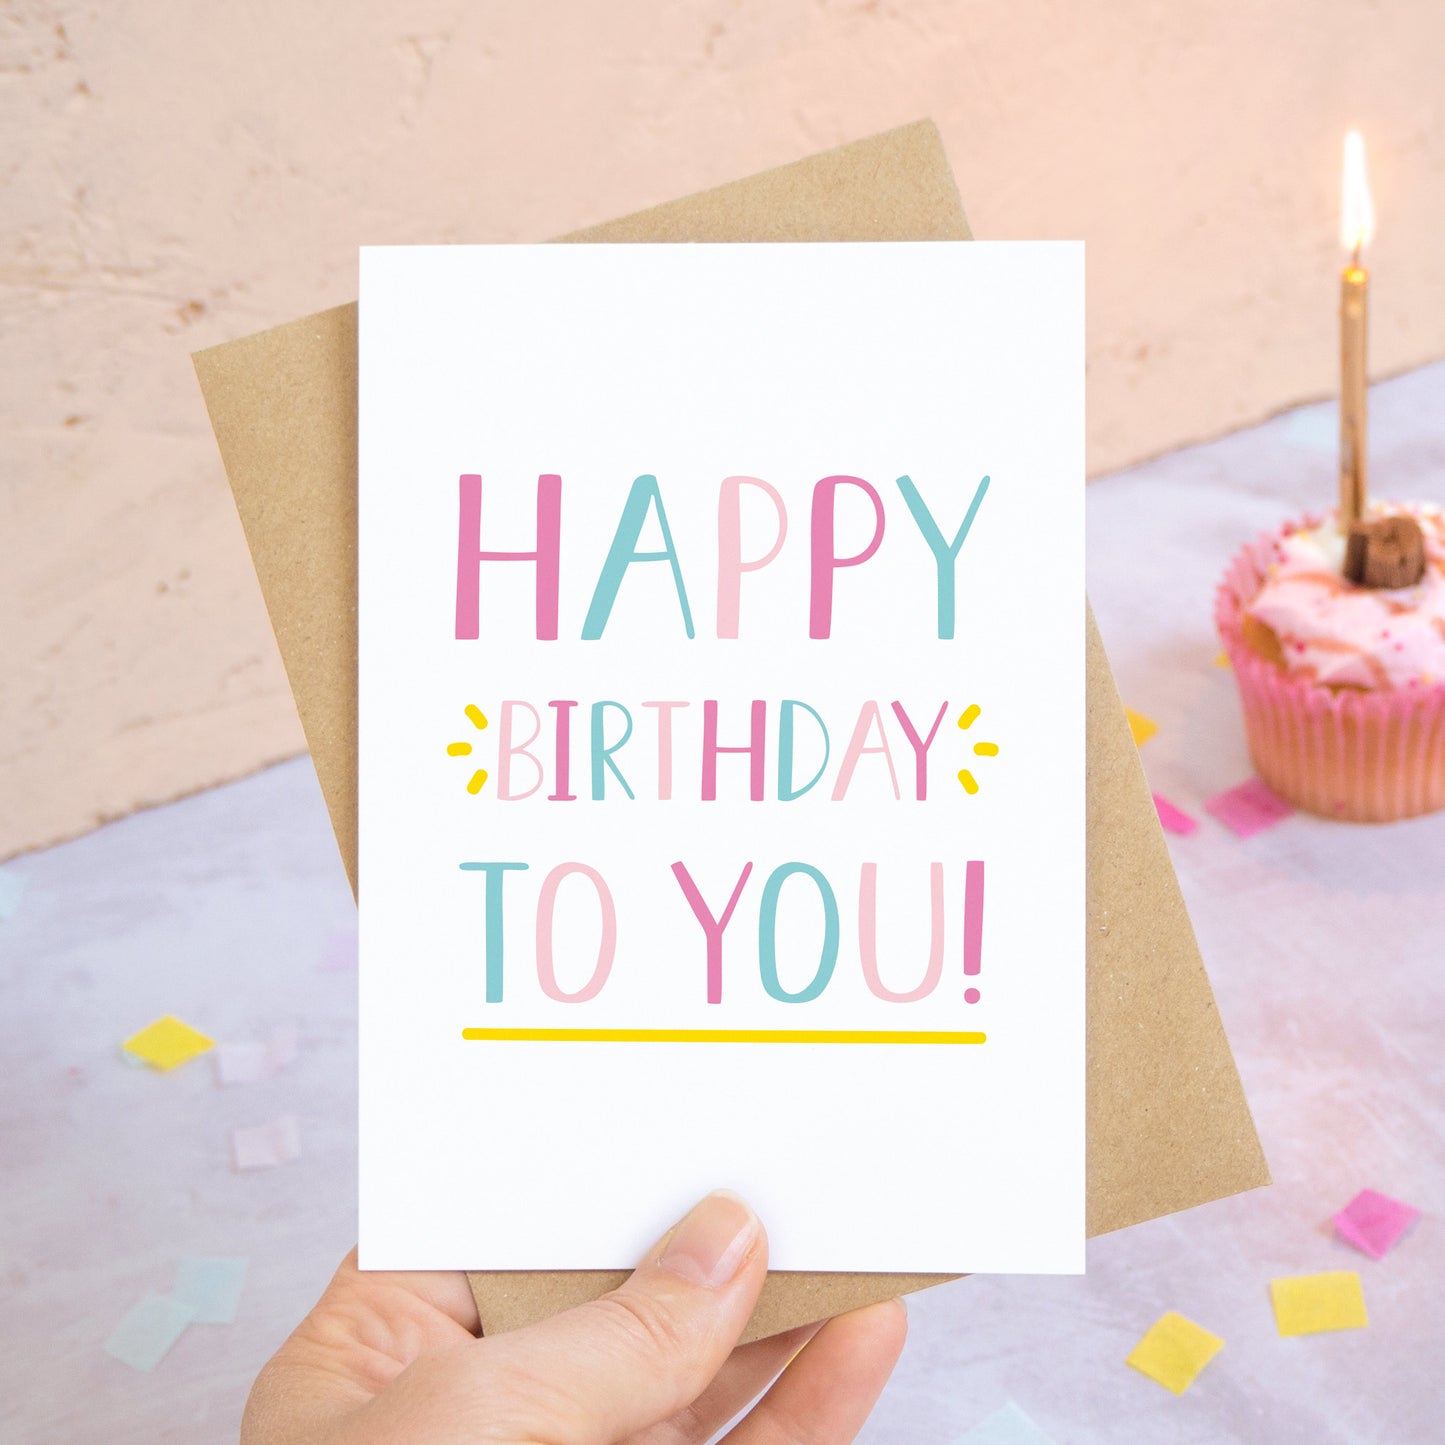 A happy birthday to you card in pink and blue photographed over a grey and peach background with pieces of confetti and a pink cupcake with a single candle.